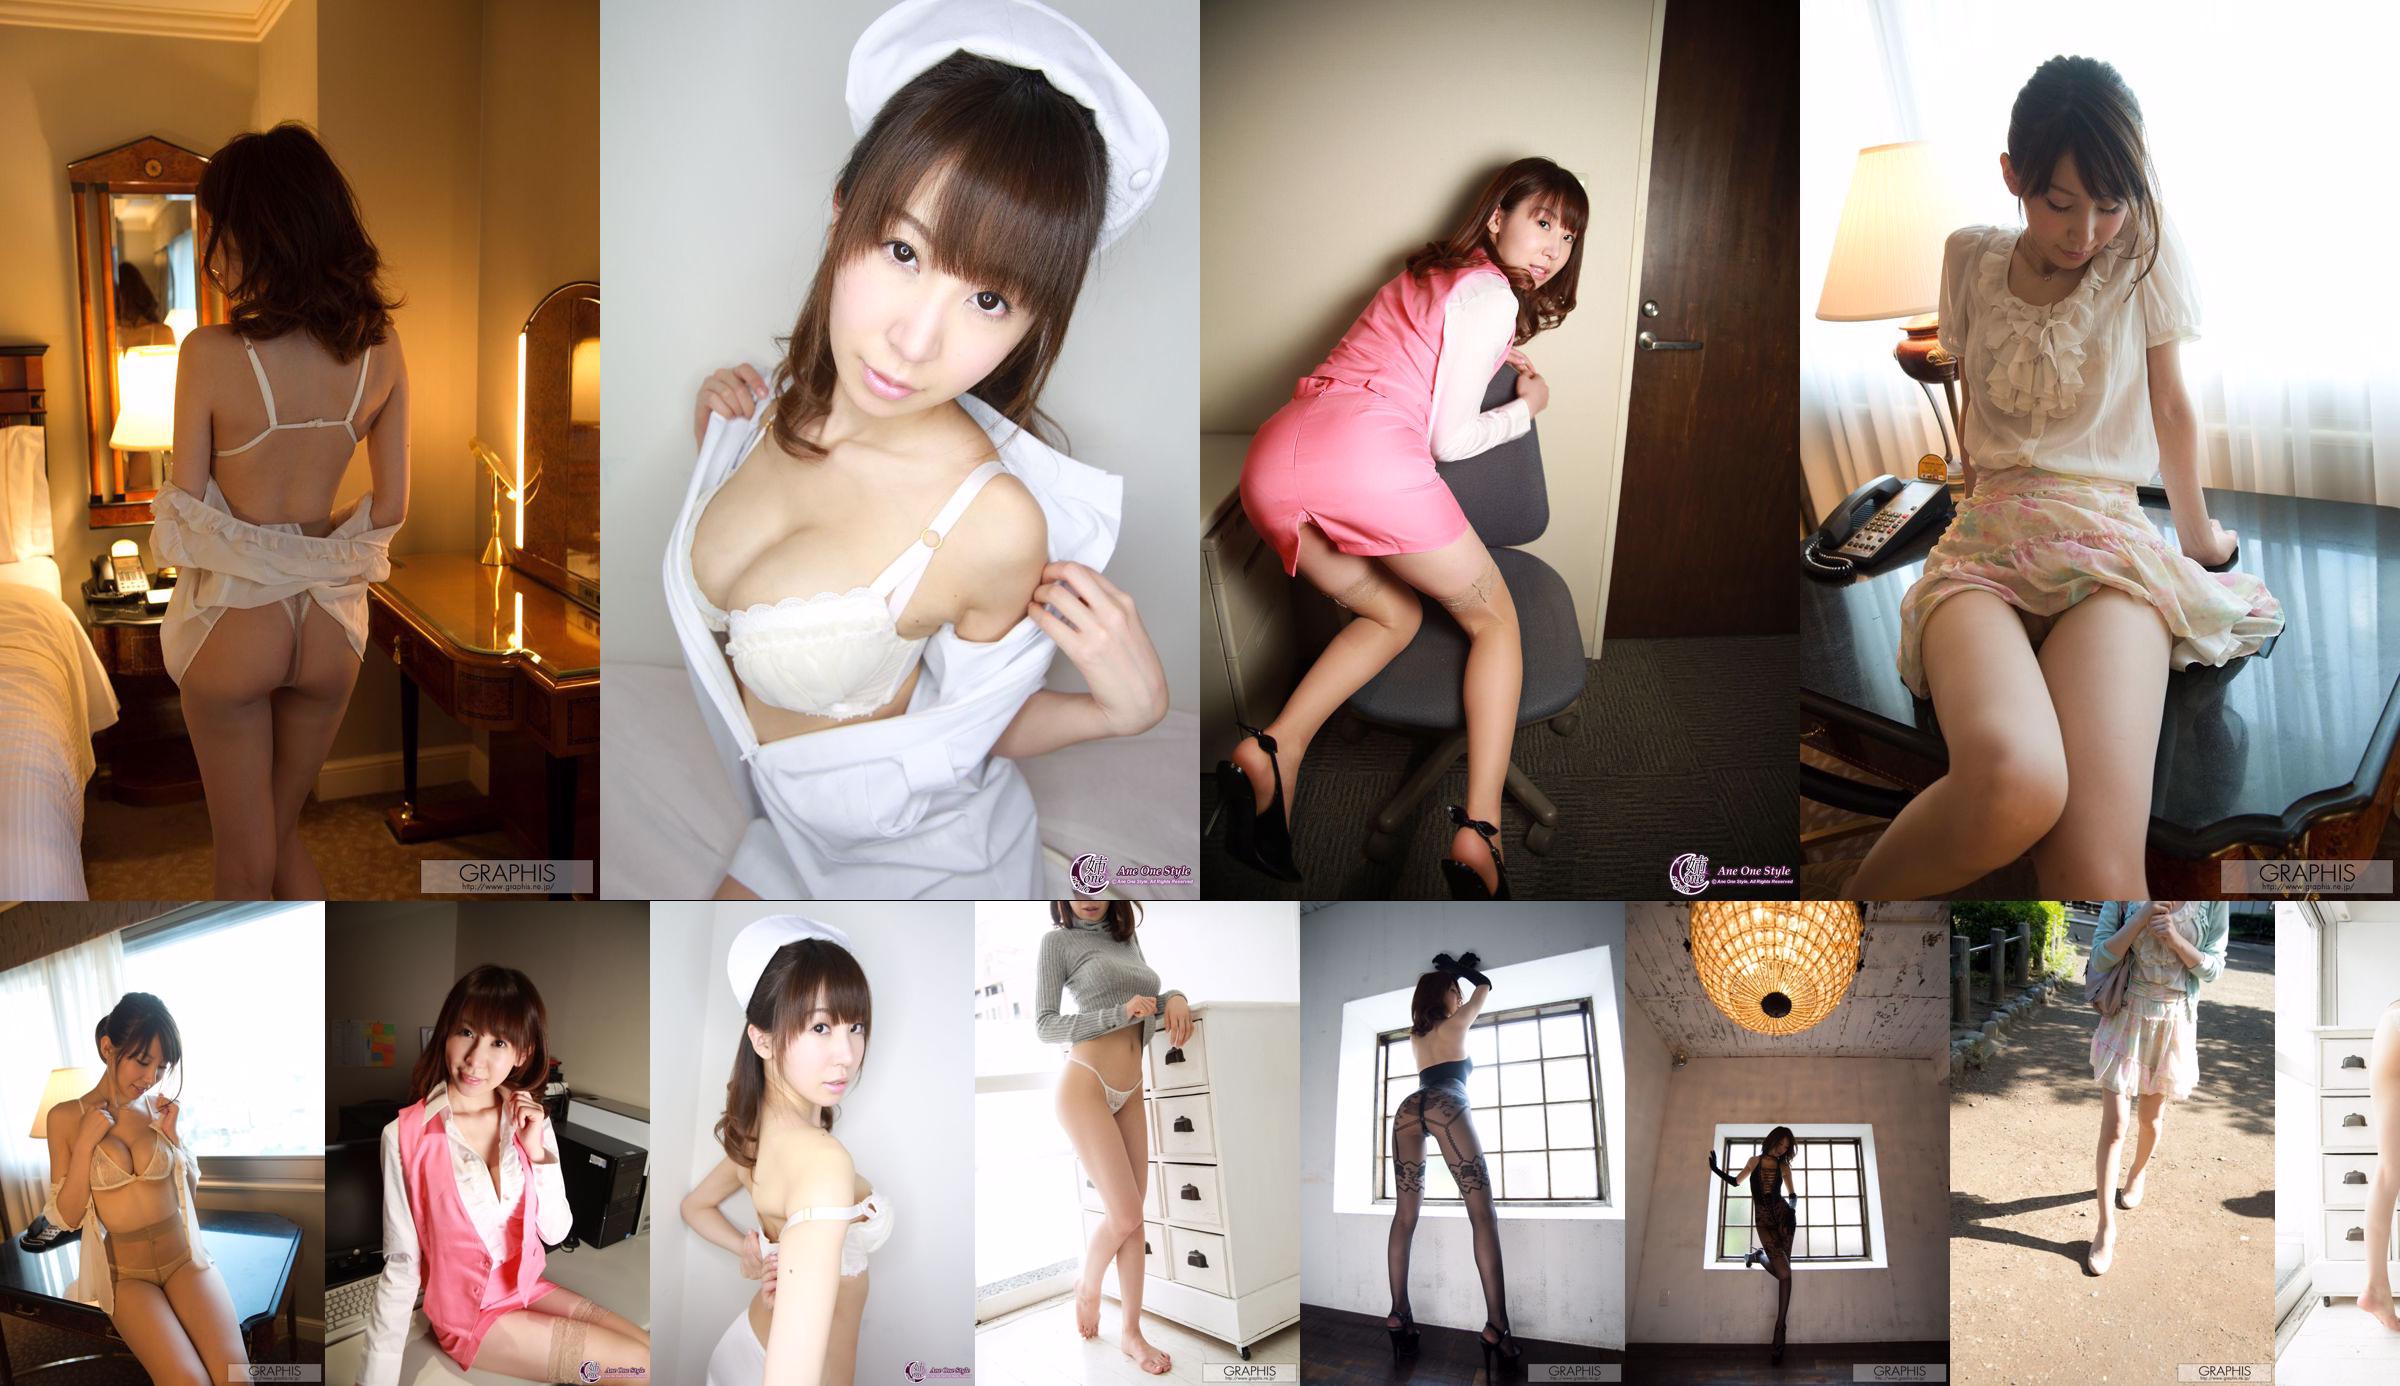 Chibana Meisa / Chibana Meisa [Graphis] First Gravure First take off daughter No.6957ae Page 13